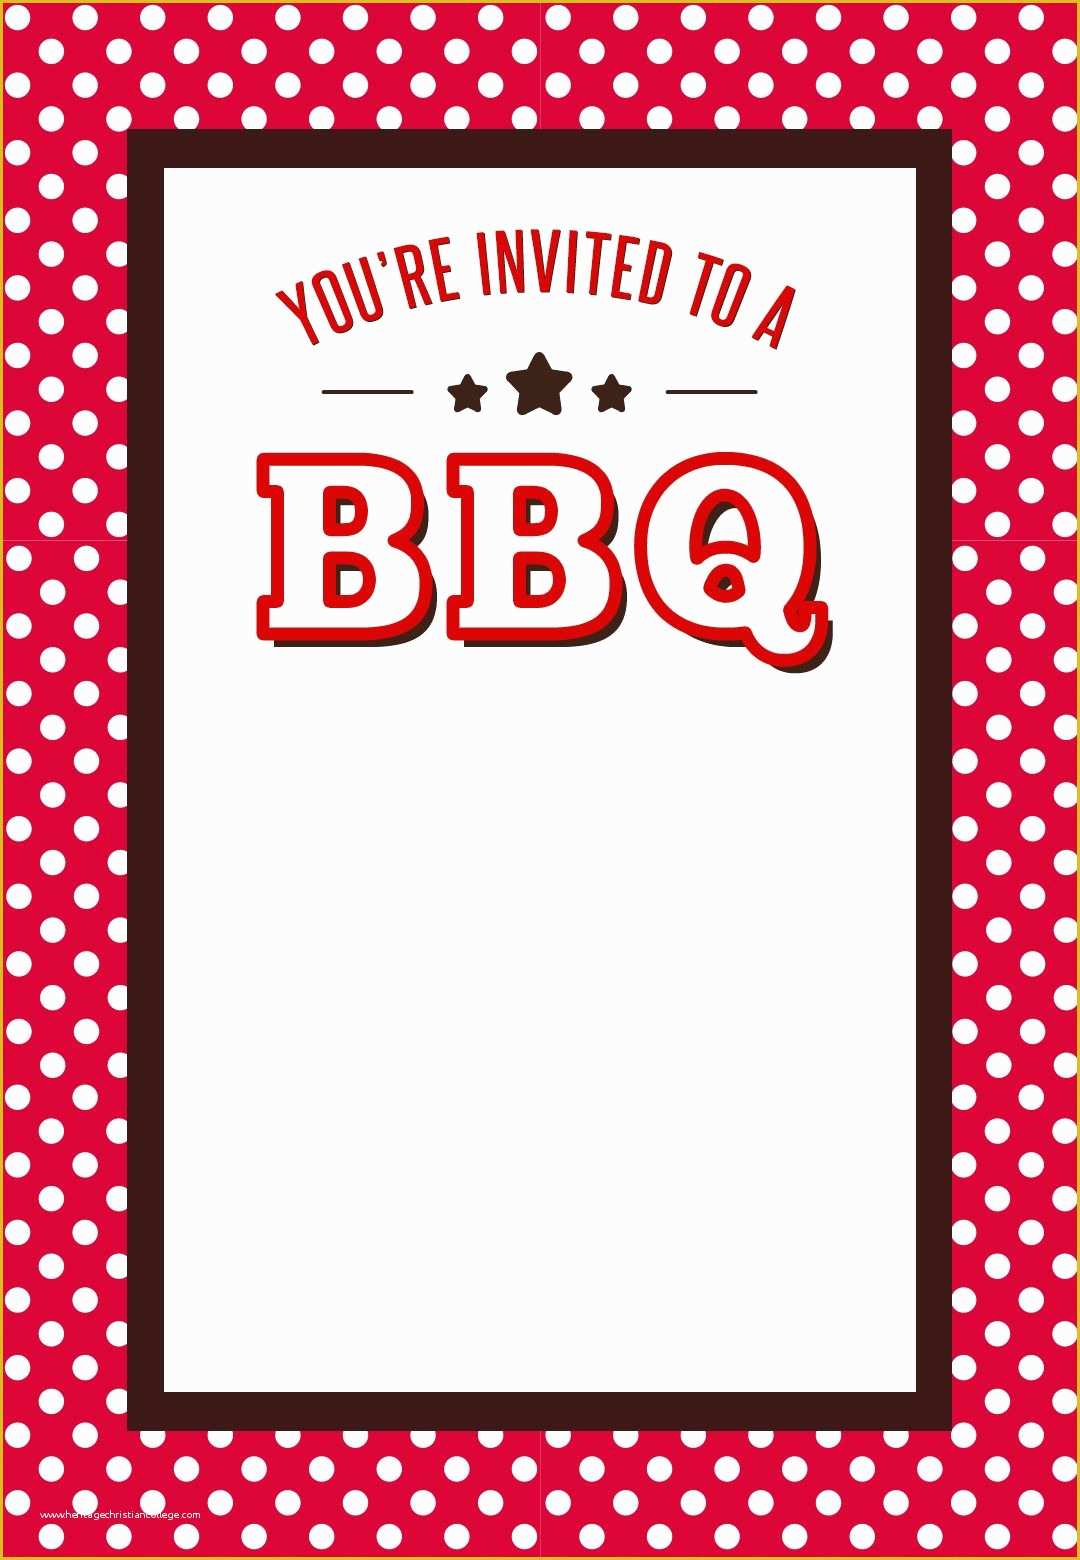 Free Downloadable Bbq Invitation Template Of A Bbq Free Printable Bbq Party Invitation Template